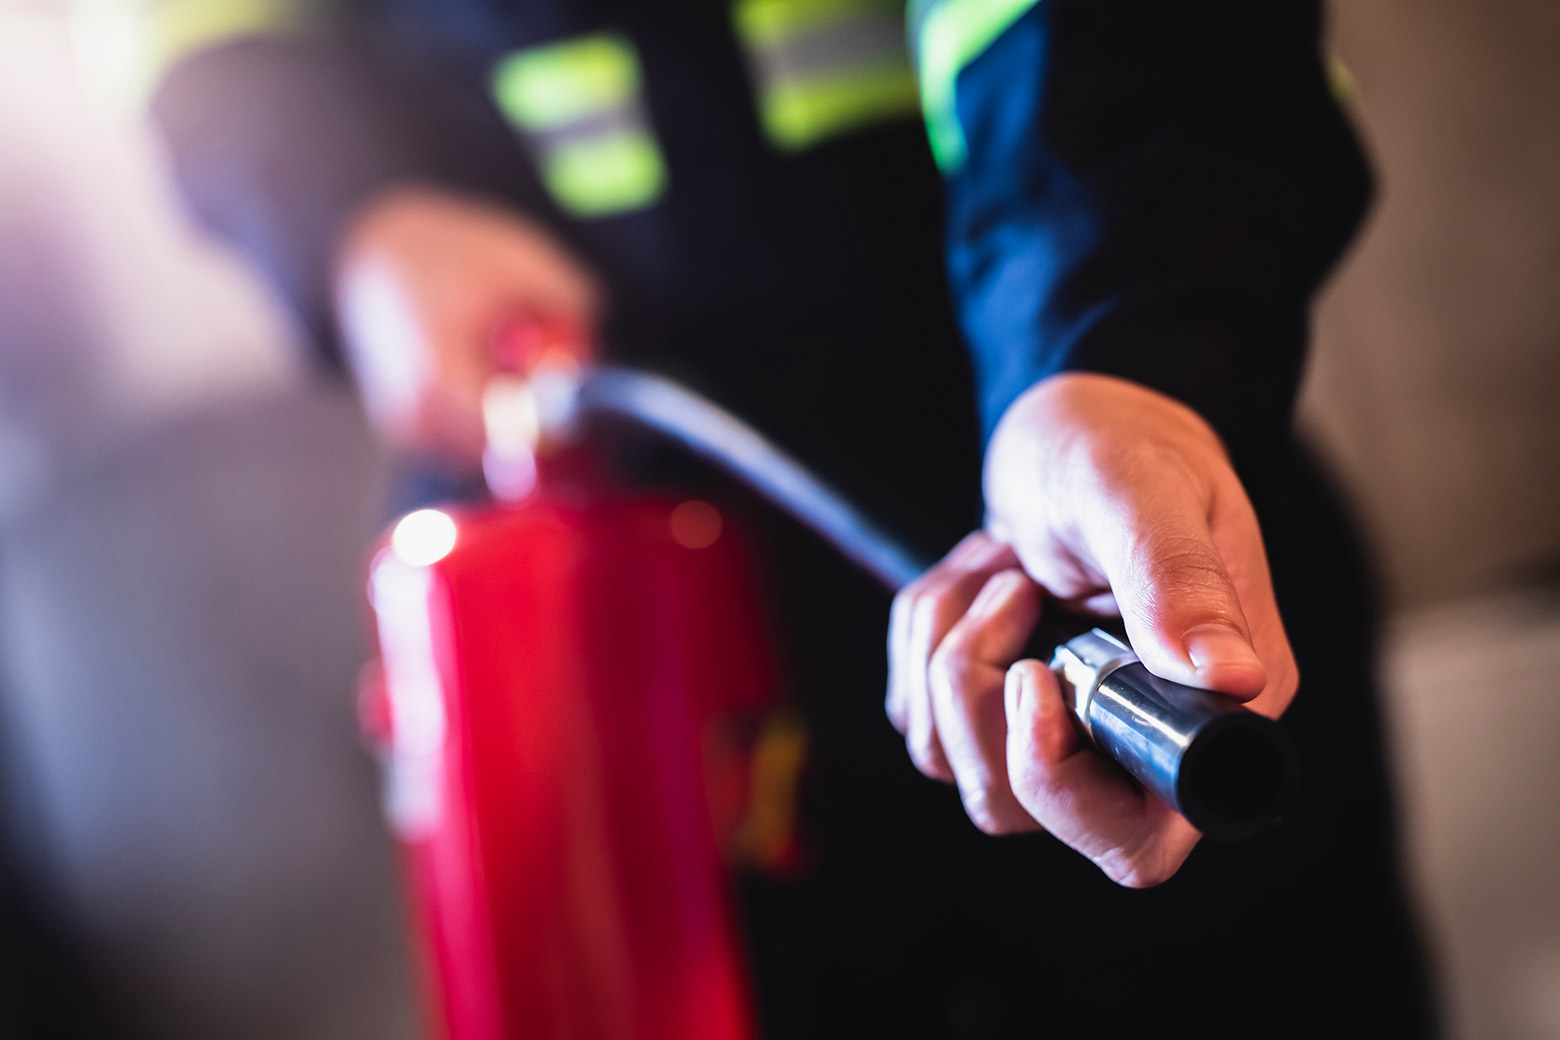 Operating a fire extinguisher